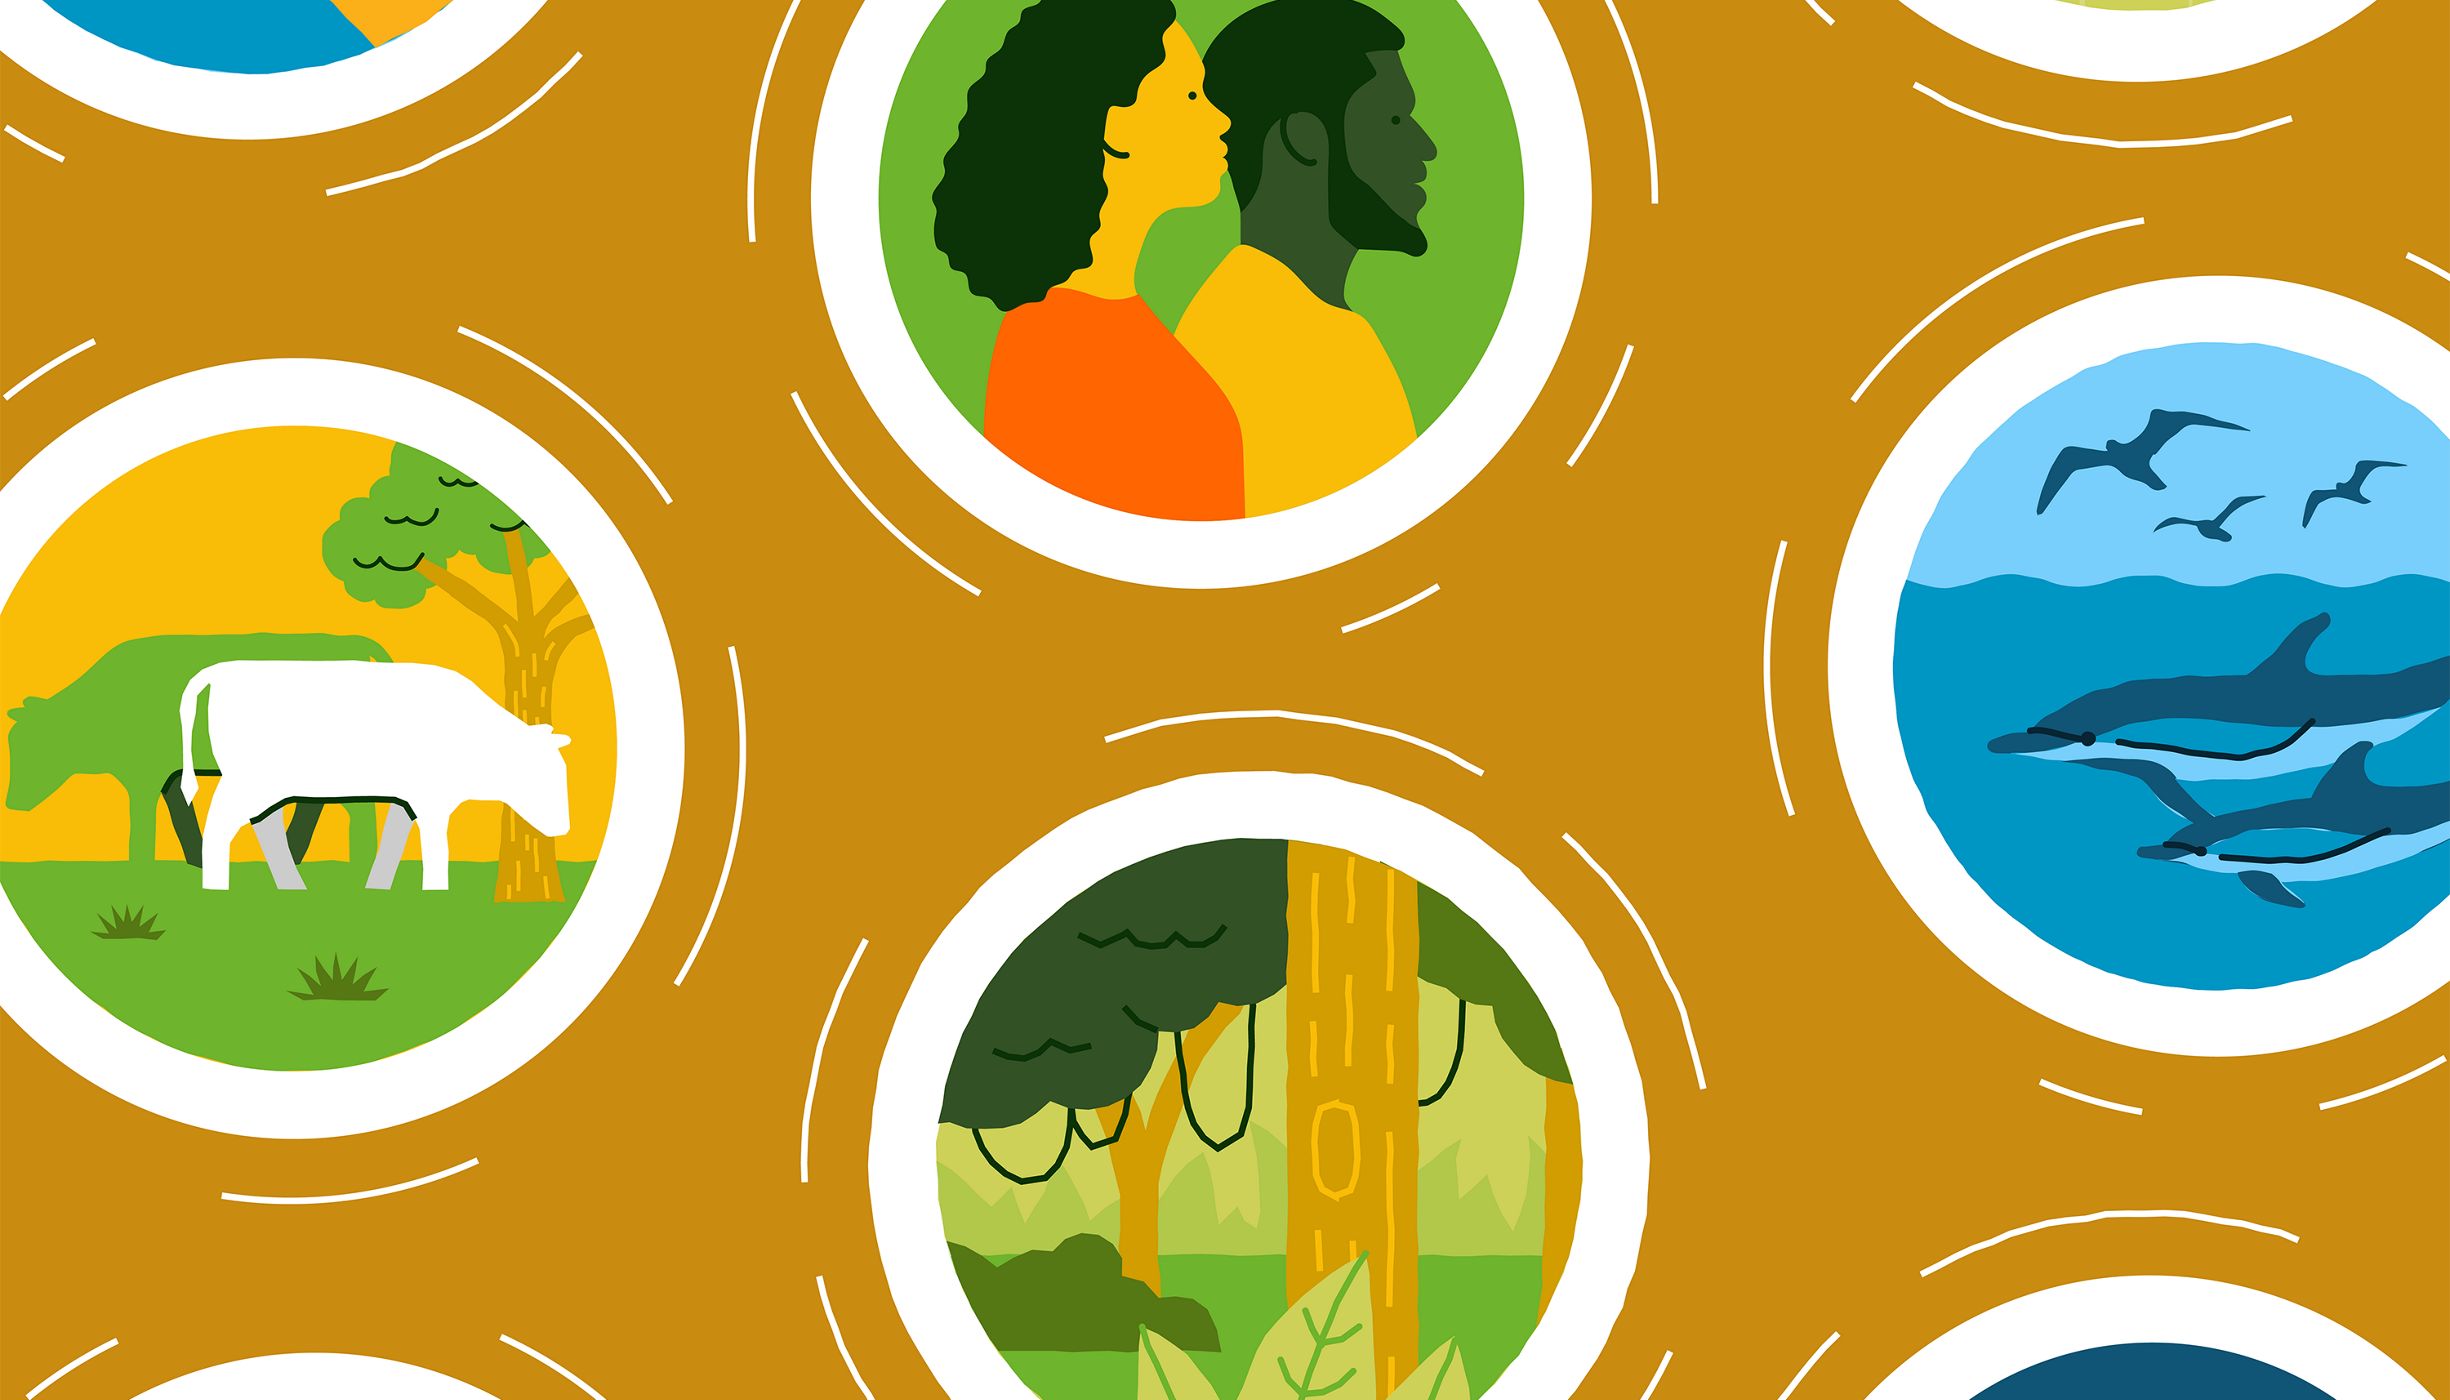 illustration with circles containing imagery of people, jungle, dolphins, cattle, houses, and mangroves against a mustard yellow background